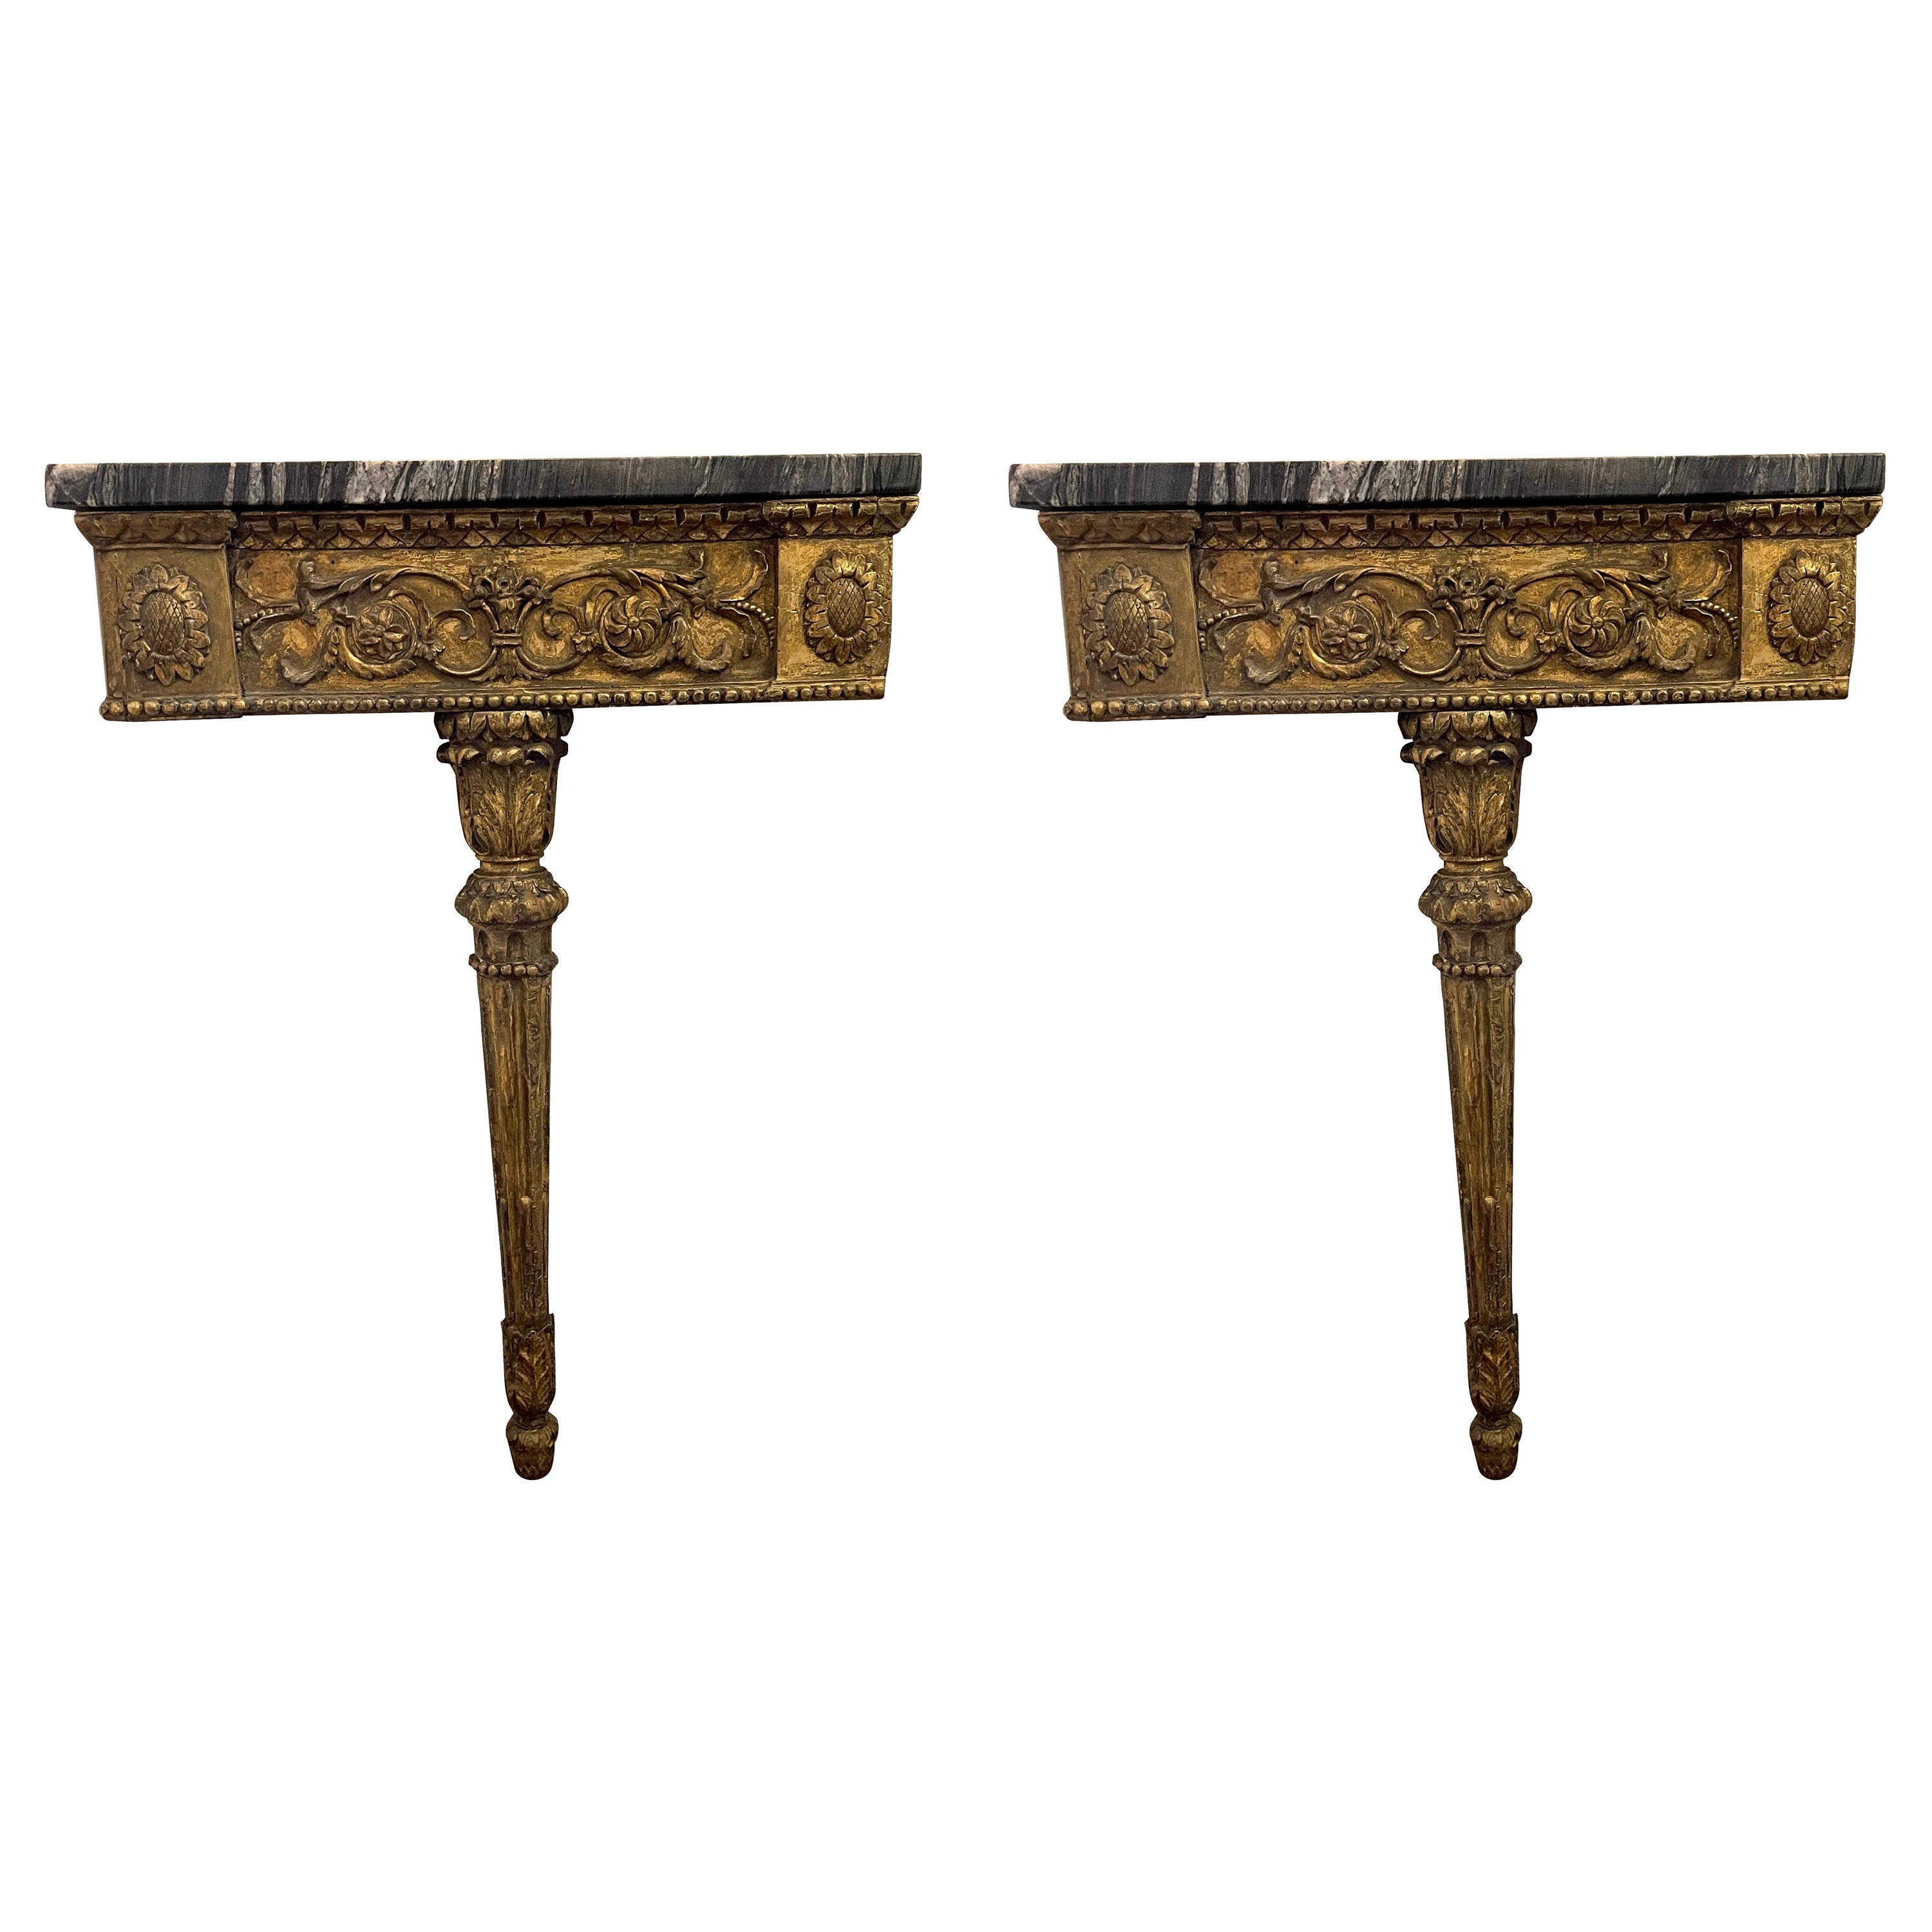 Antique Continental Gilt Mounted Corner Tables  with Black and Gold Marble Top